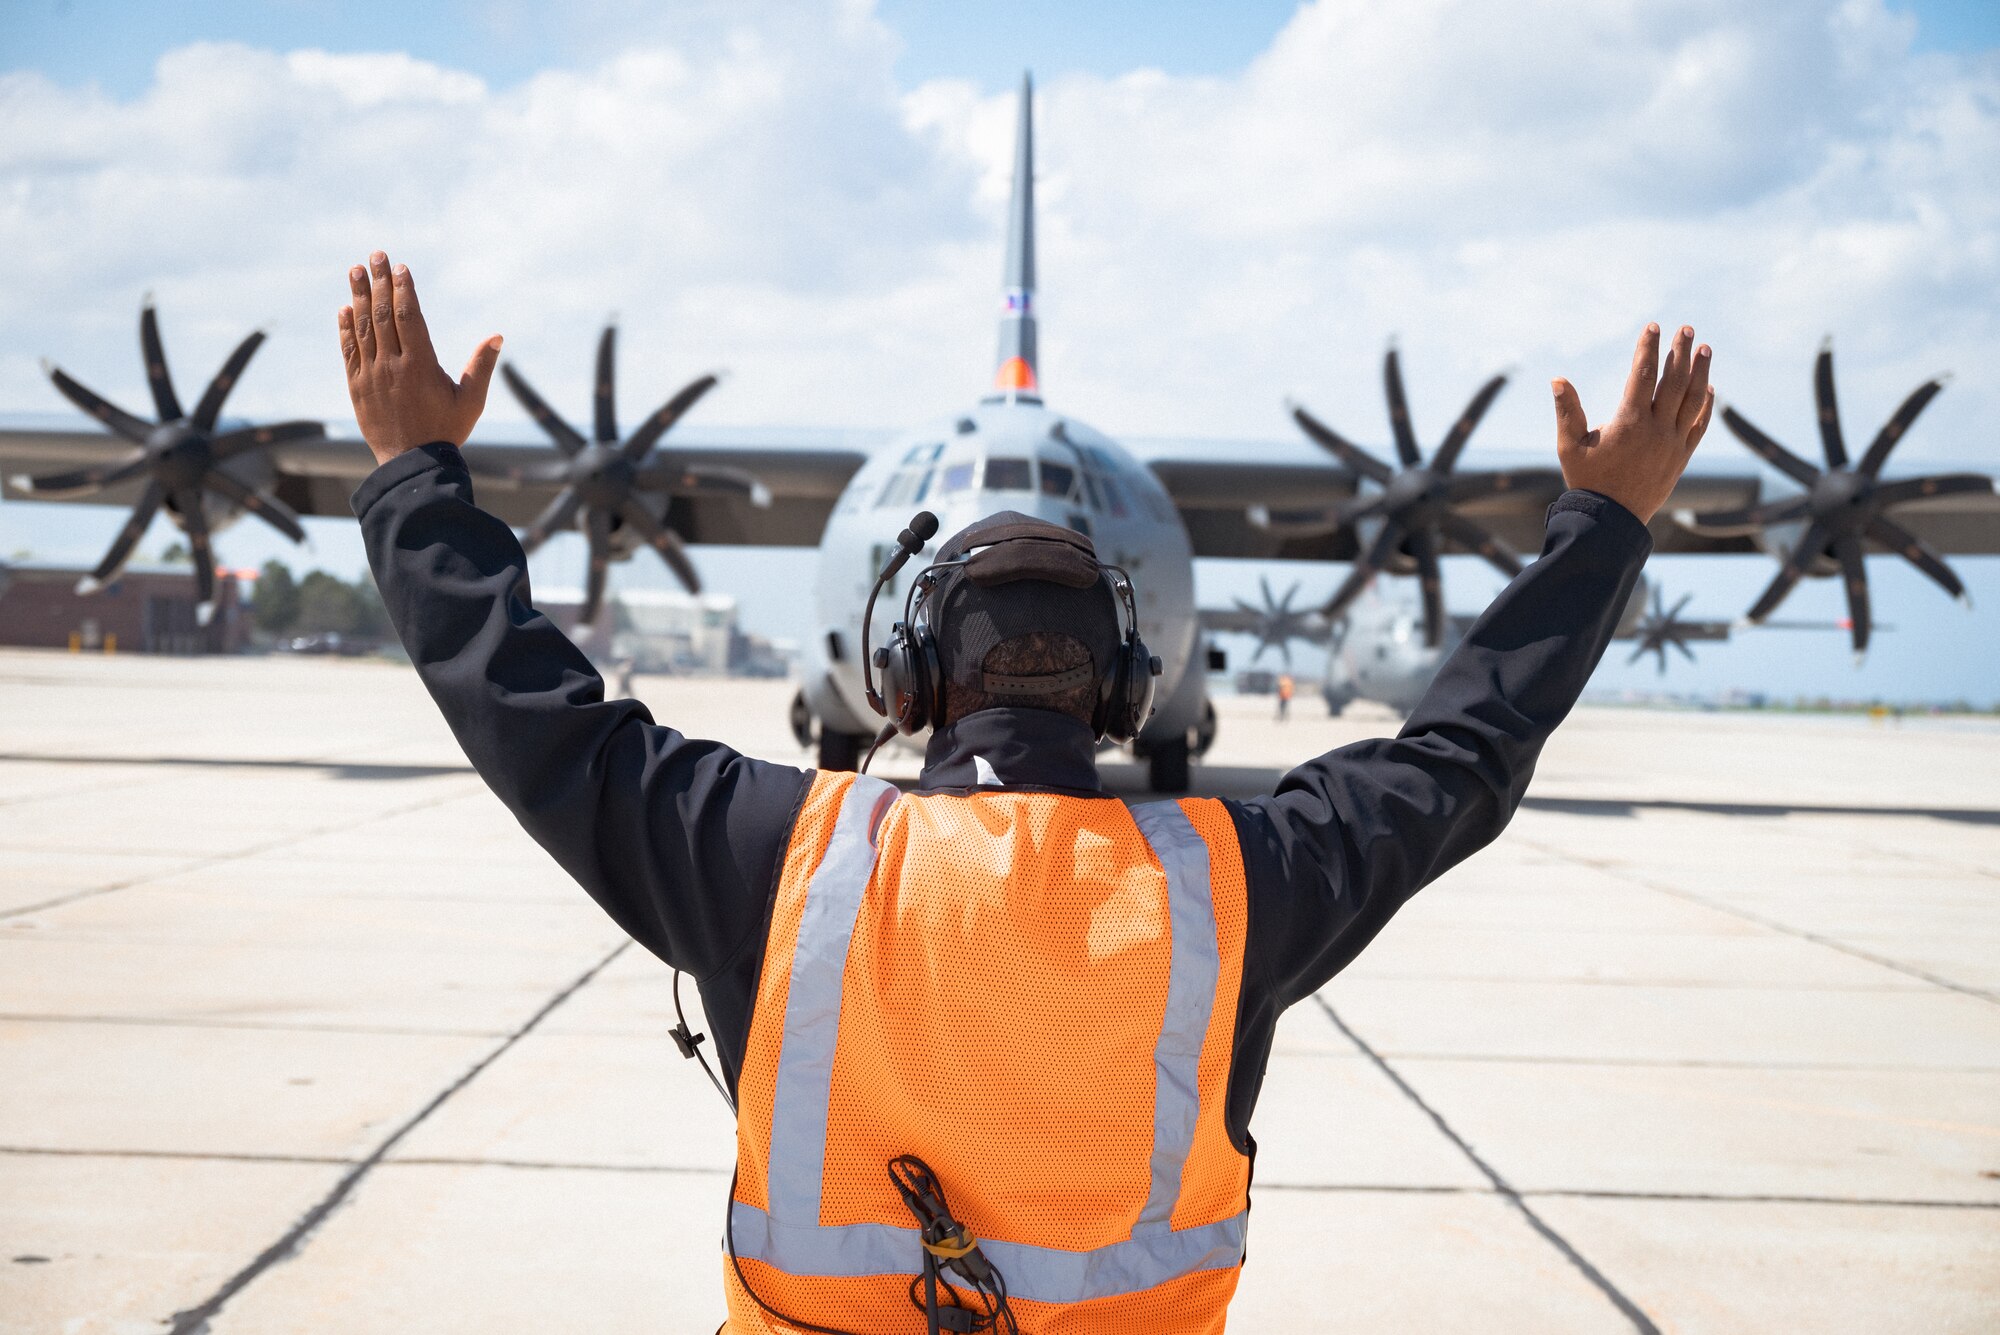 Cameron Seals, a U.S. Forest Service Modular Airborne Firefighting Systems (MAFFS) Airtanker Base Specialist (MABS) trainee, marshalls a Nevada Air National Guard C-130H Hercules during the annual MAFFS Spring Training in Boise, Idaho